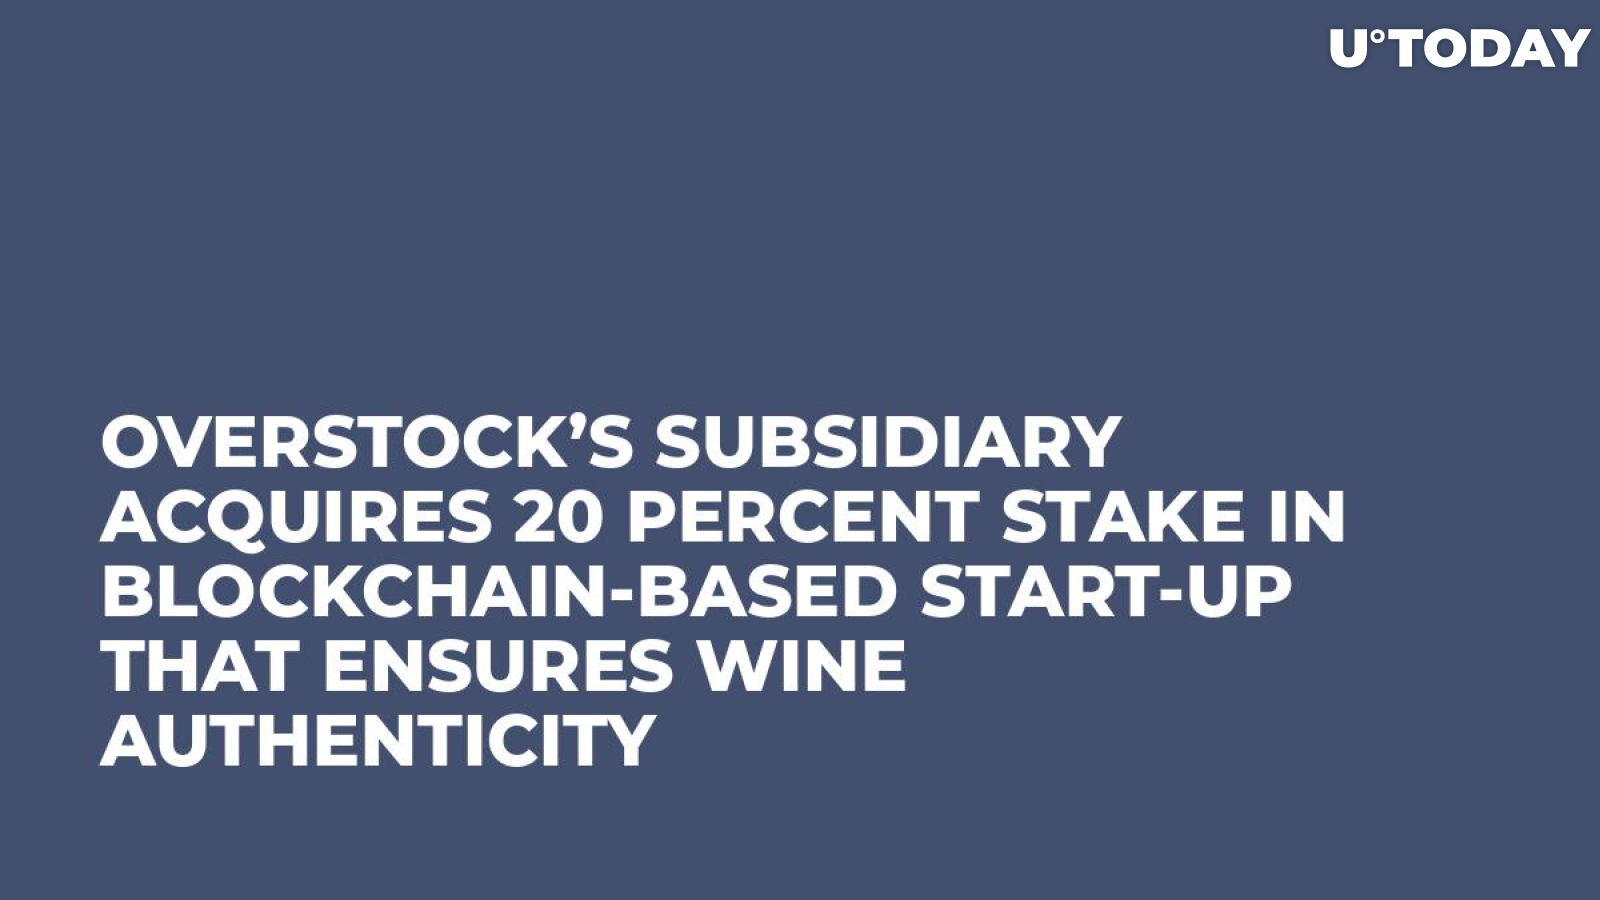 Overstock’s Subsidiary Acquires 20 Percent Stake in Blockchain-Based Start-Up That Ensures Wine Authenticity